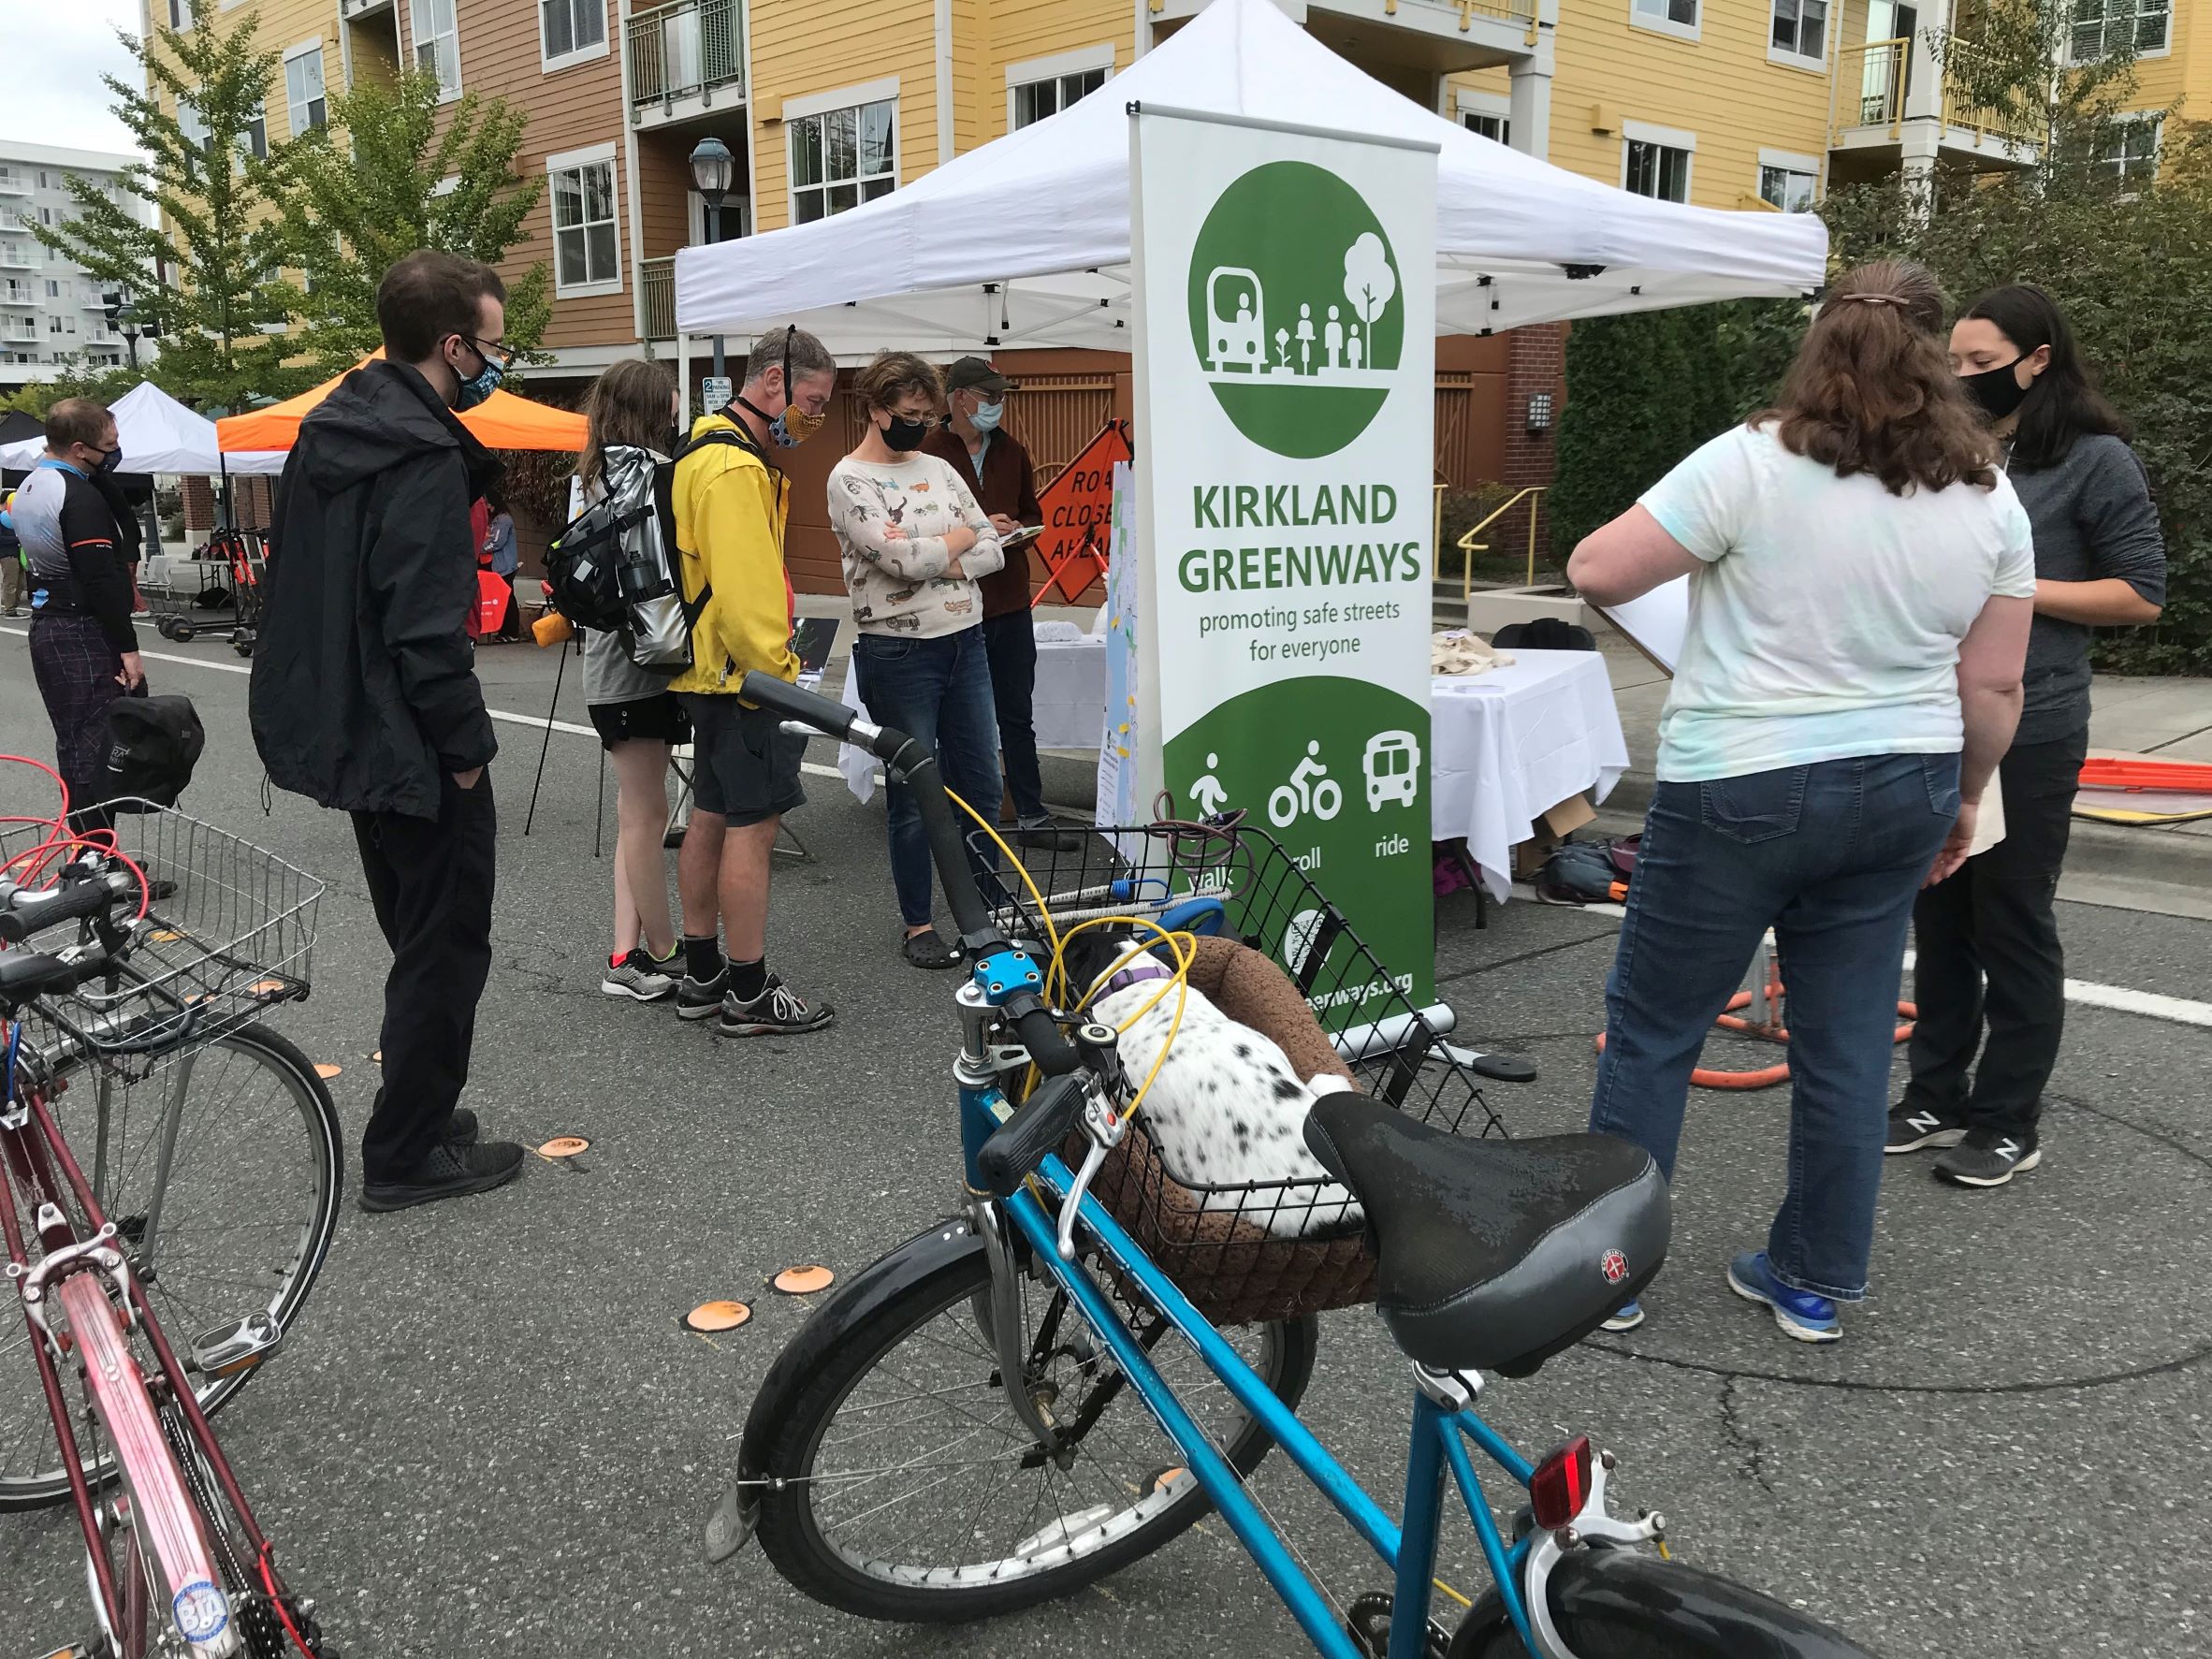 White tent booth space with Kirkland Greenways group, People engaging with the booth and bike with a dog in the basket in front.